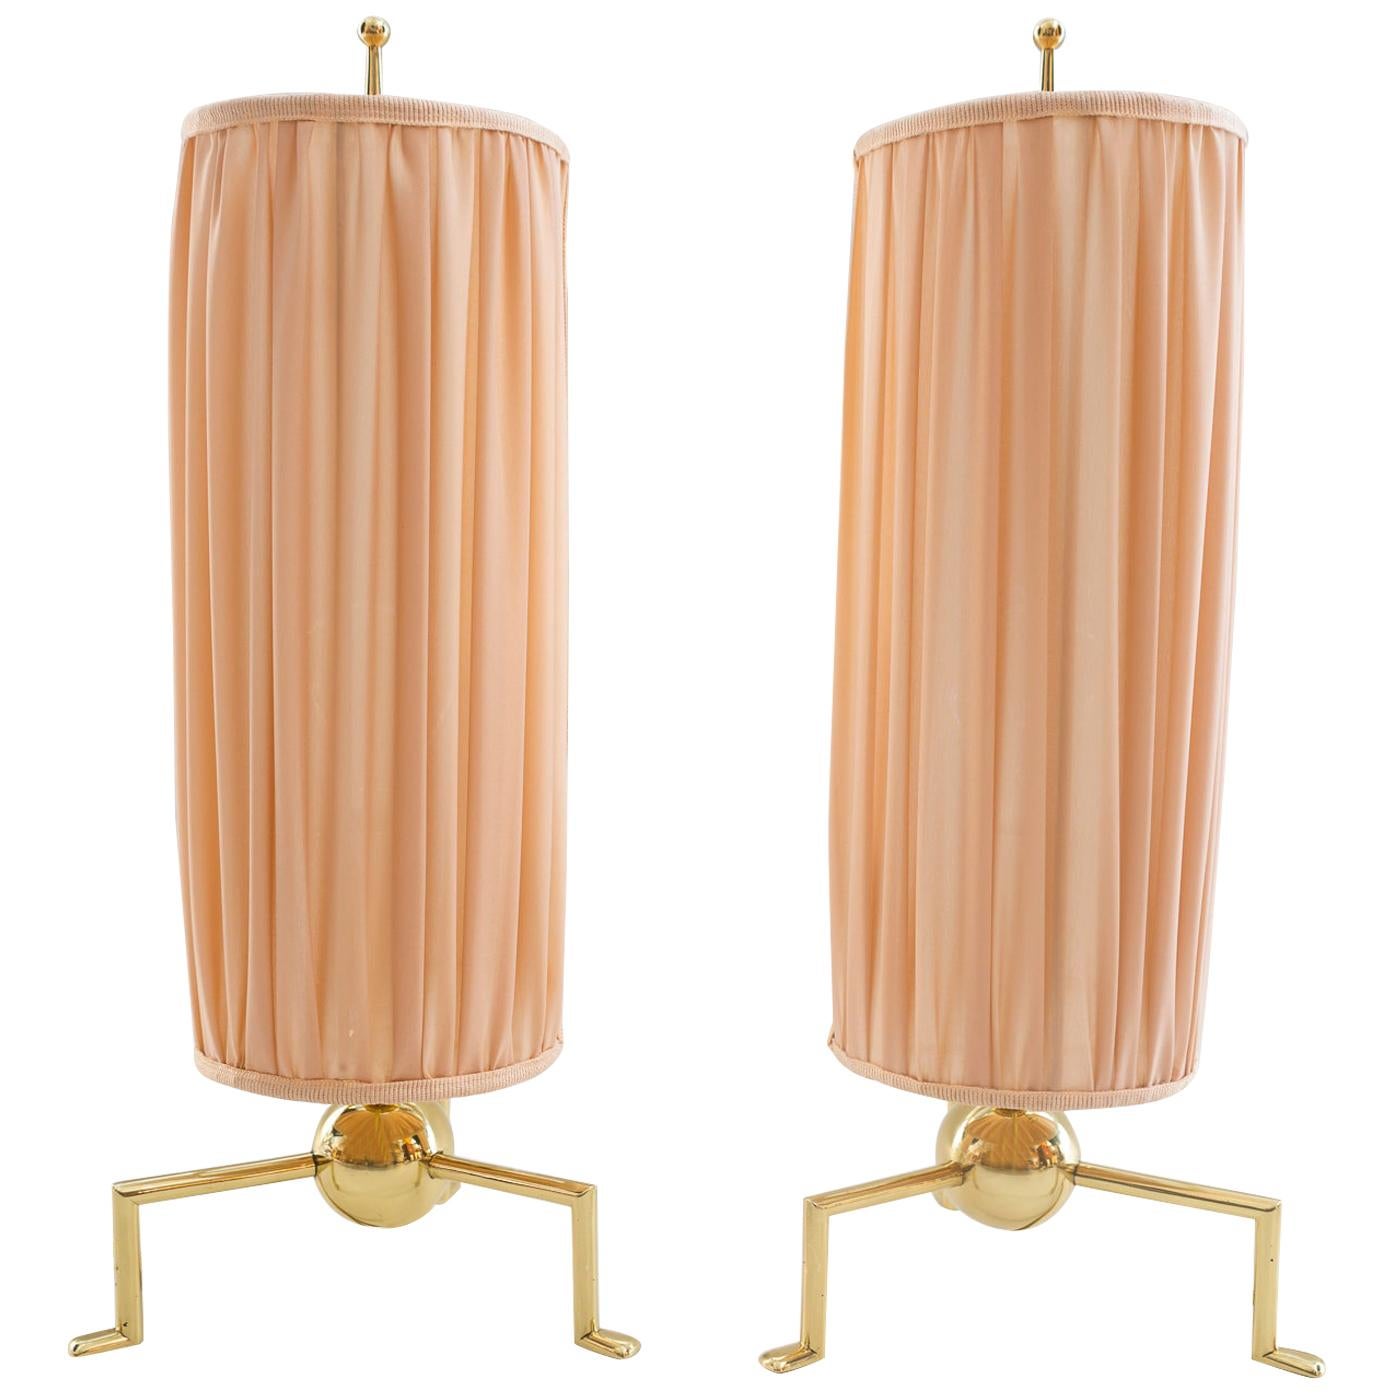 Two Exclusive and Rare Art Deco Table Lamp, Vienna, 1920s